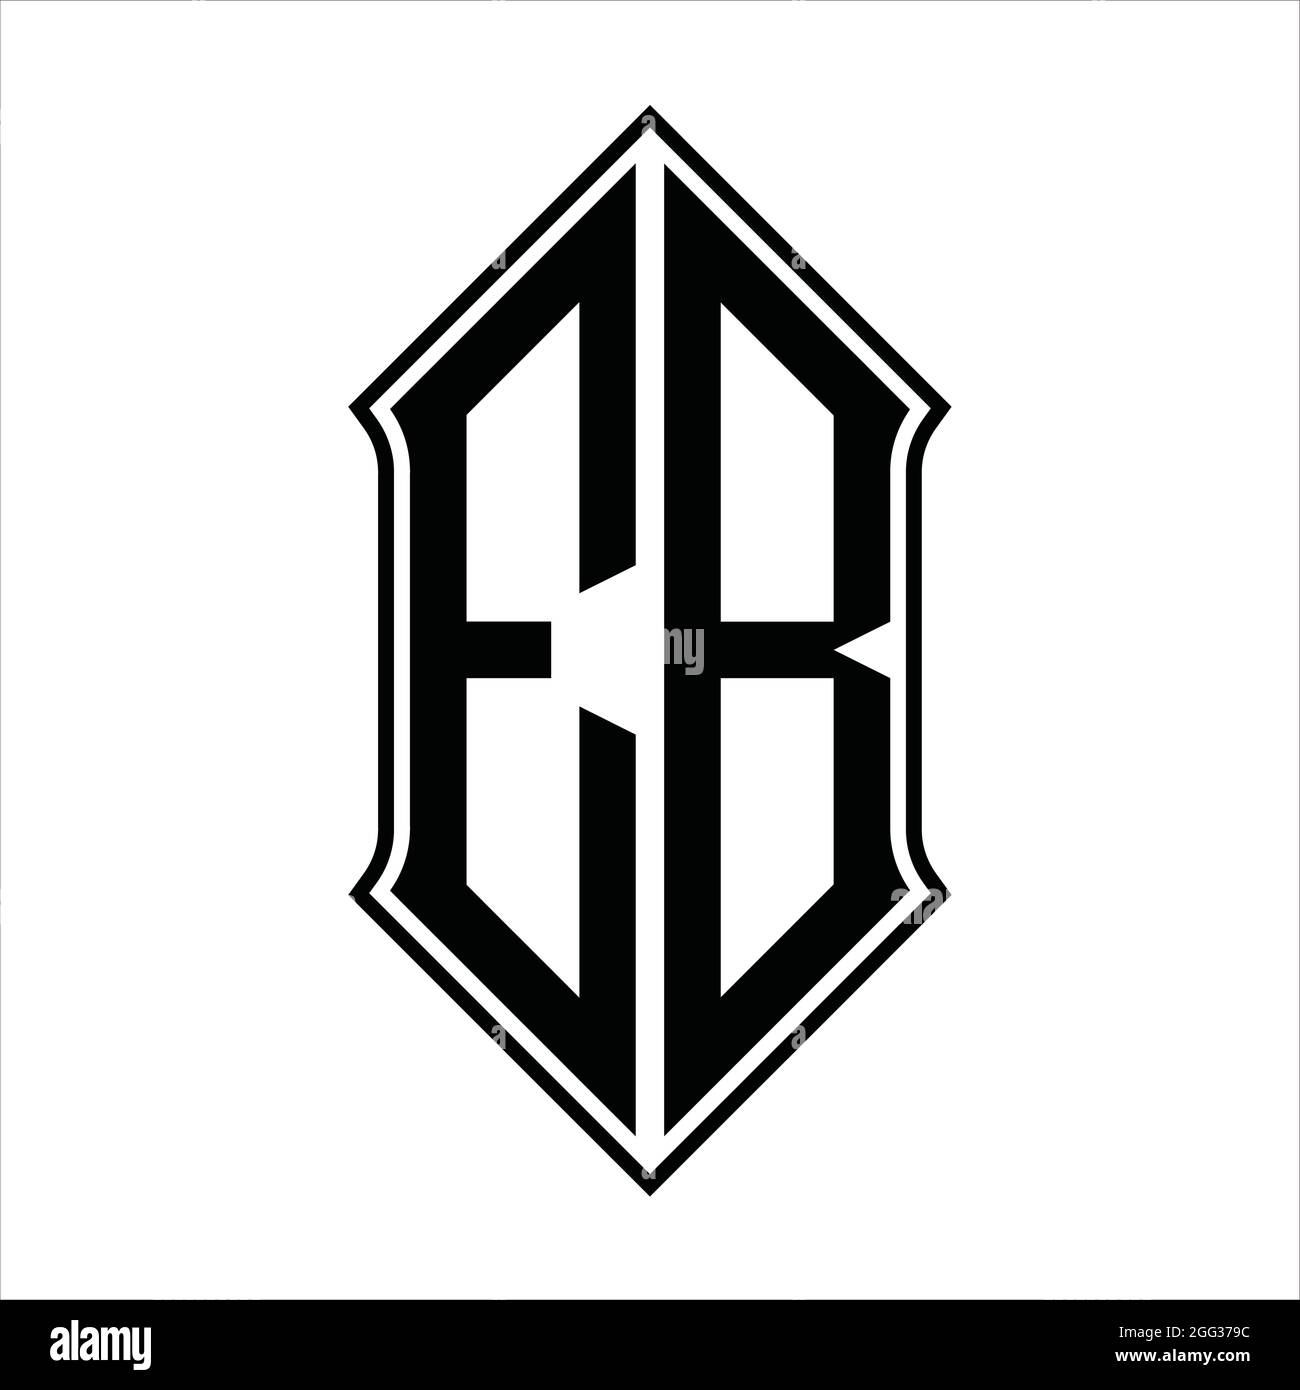 EB Logo monogram with shieldshape and black outline design template vector icon abstract Stock Vector